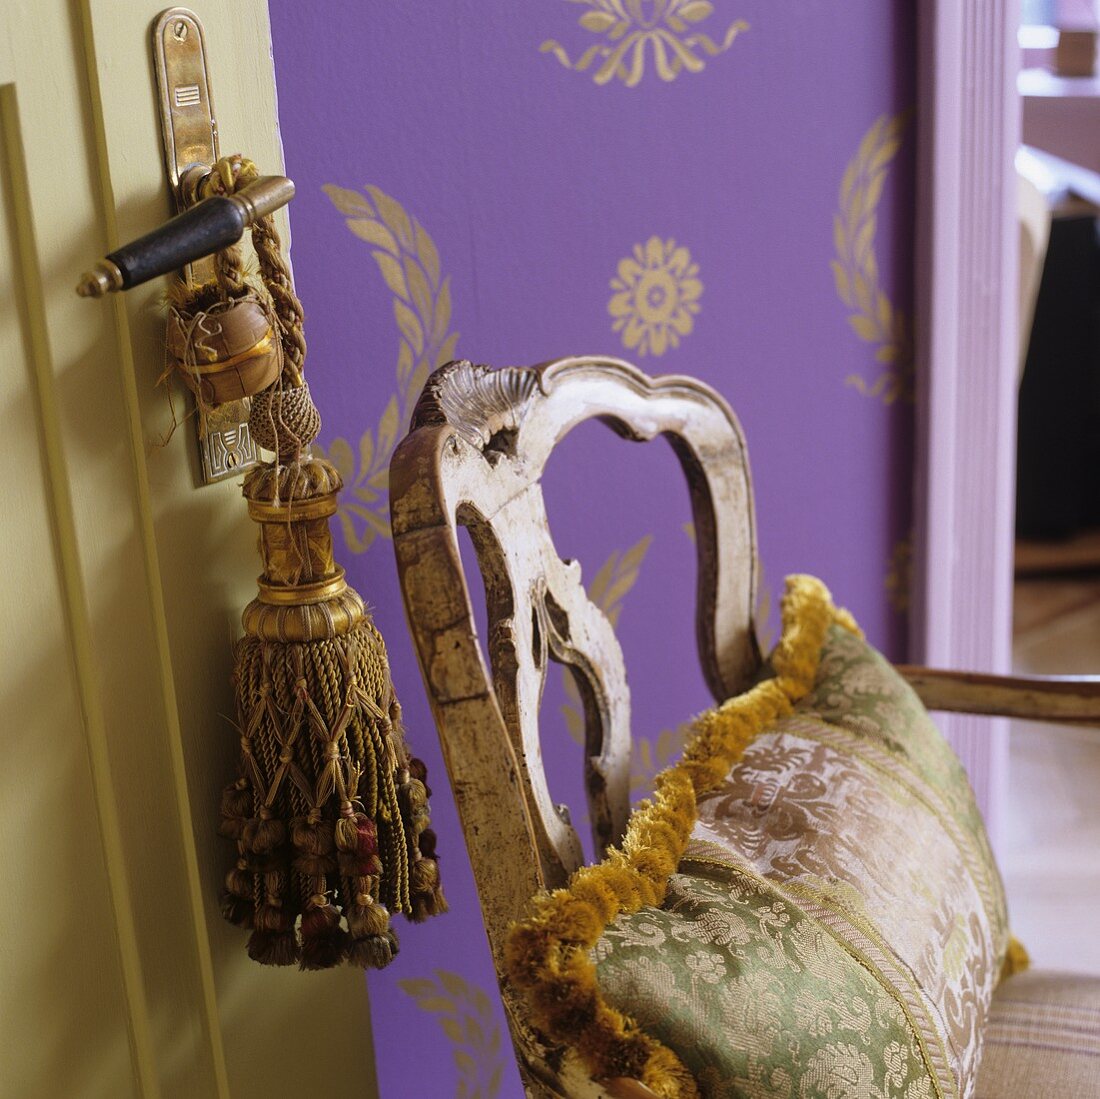 Silk pillows on a vintage wooden chair in front of purple wallpaper with gold colored Oriental pattern